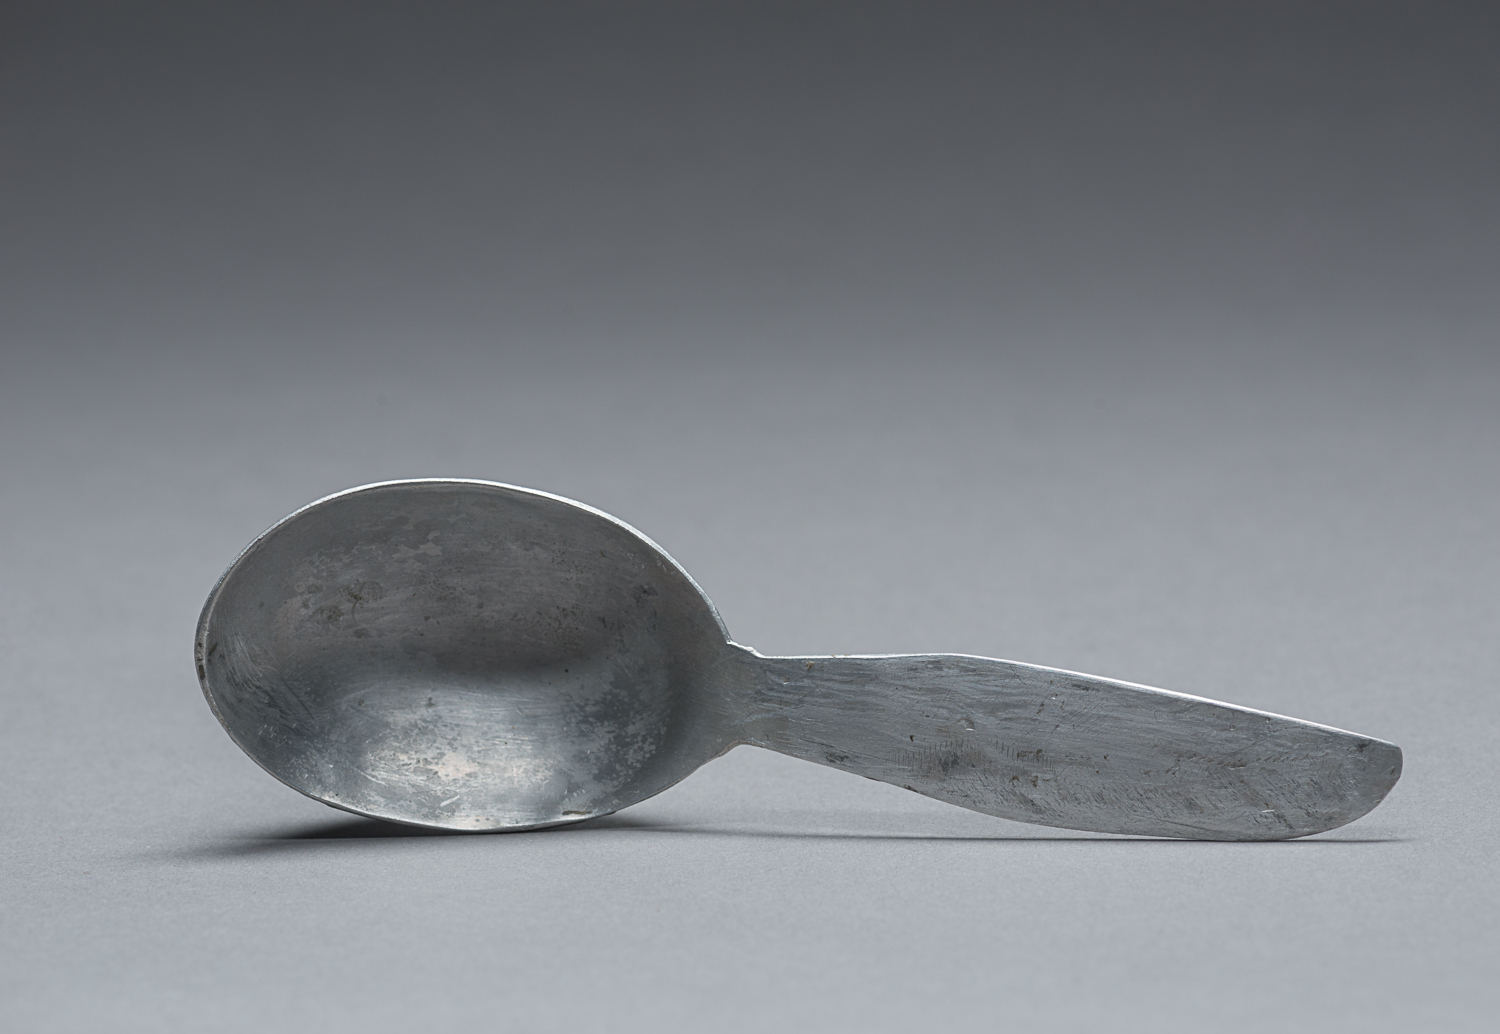 He created the spoon because Nazi guards, to dehumanize Jewish inmates, did not provide cutlery to eat their small food rations. (Photo: Peter Berra)